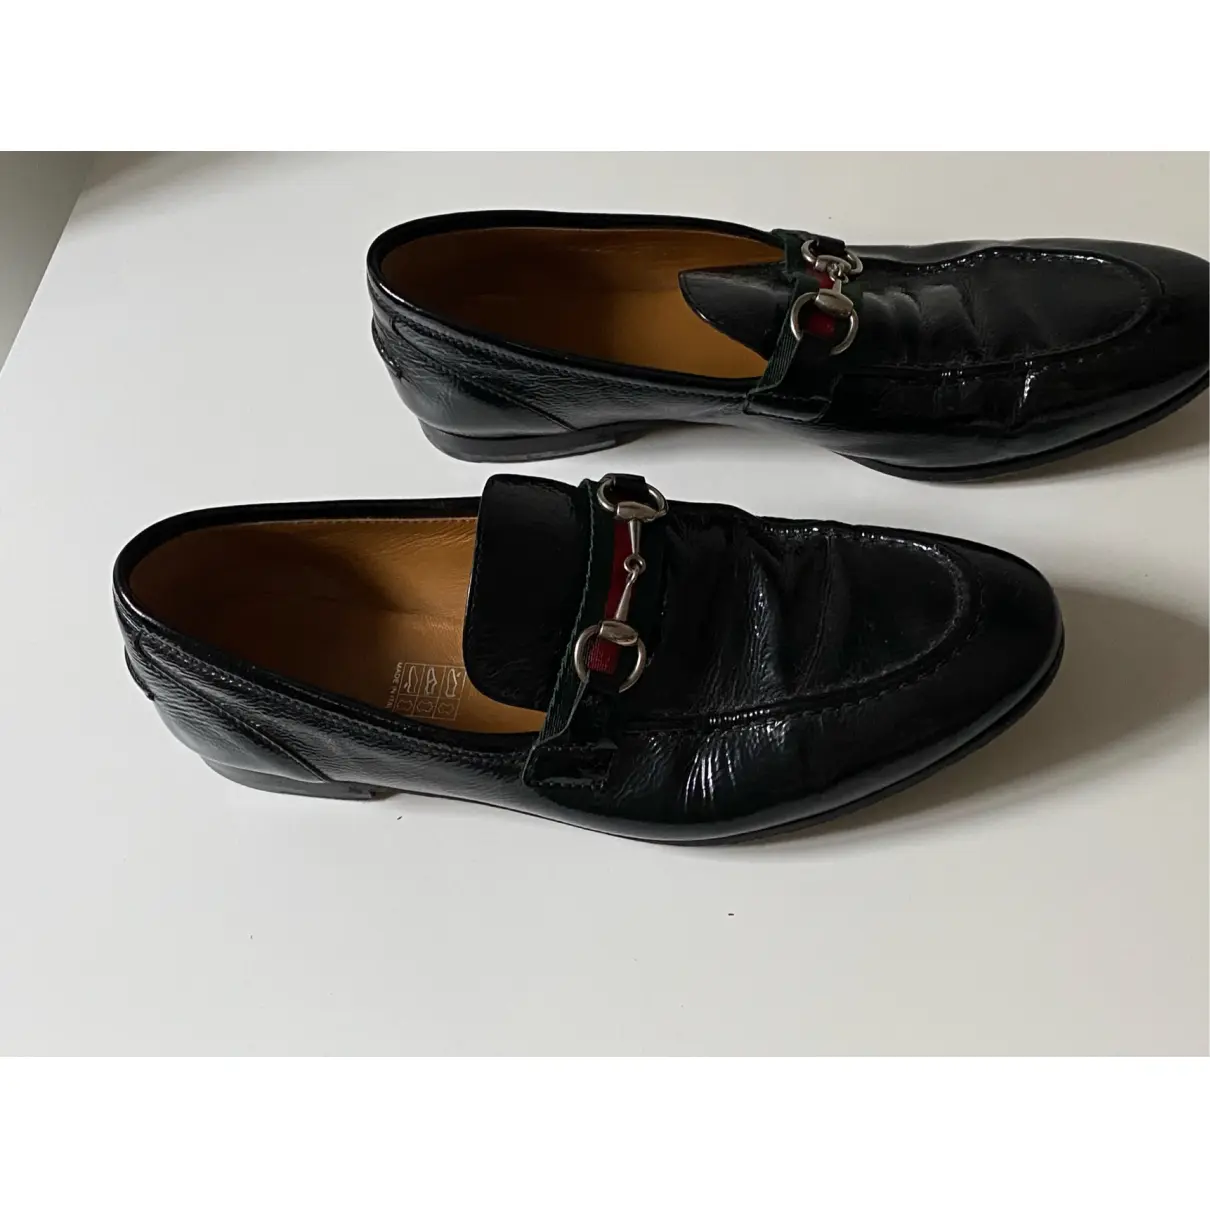 Buy Gucci Brixton patent leather flats online